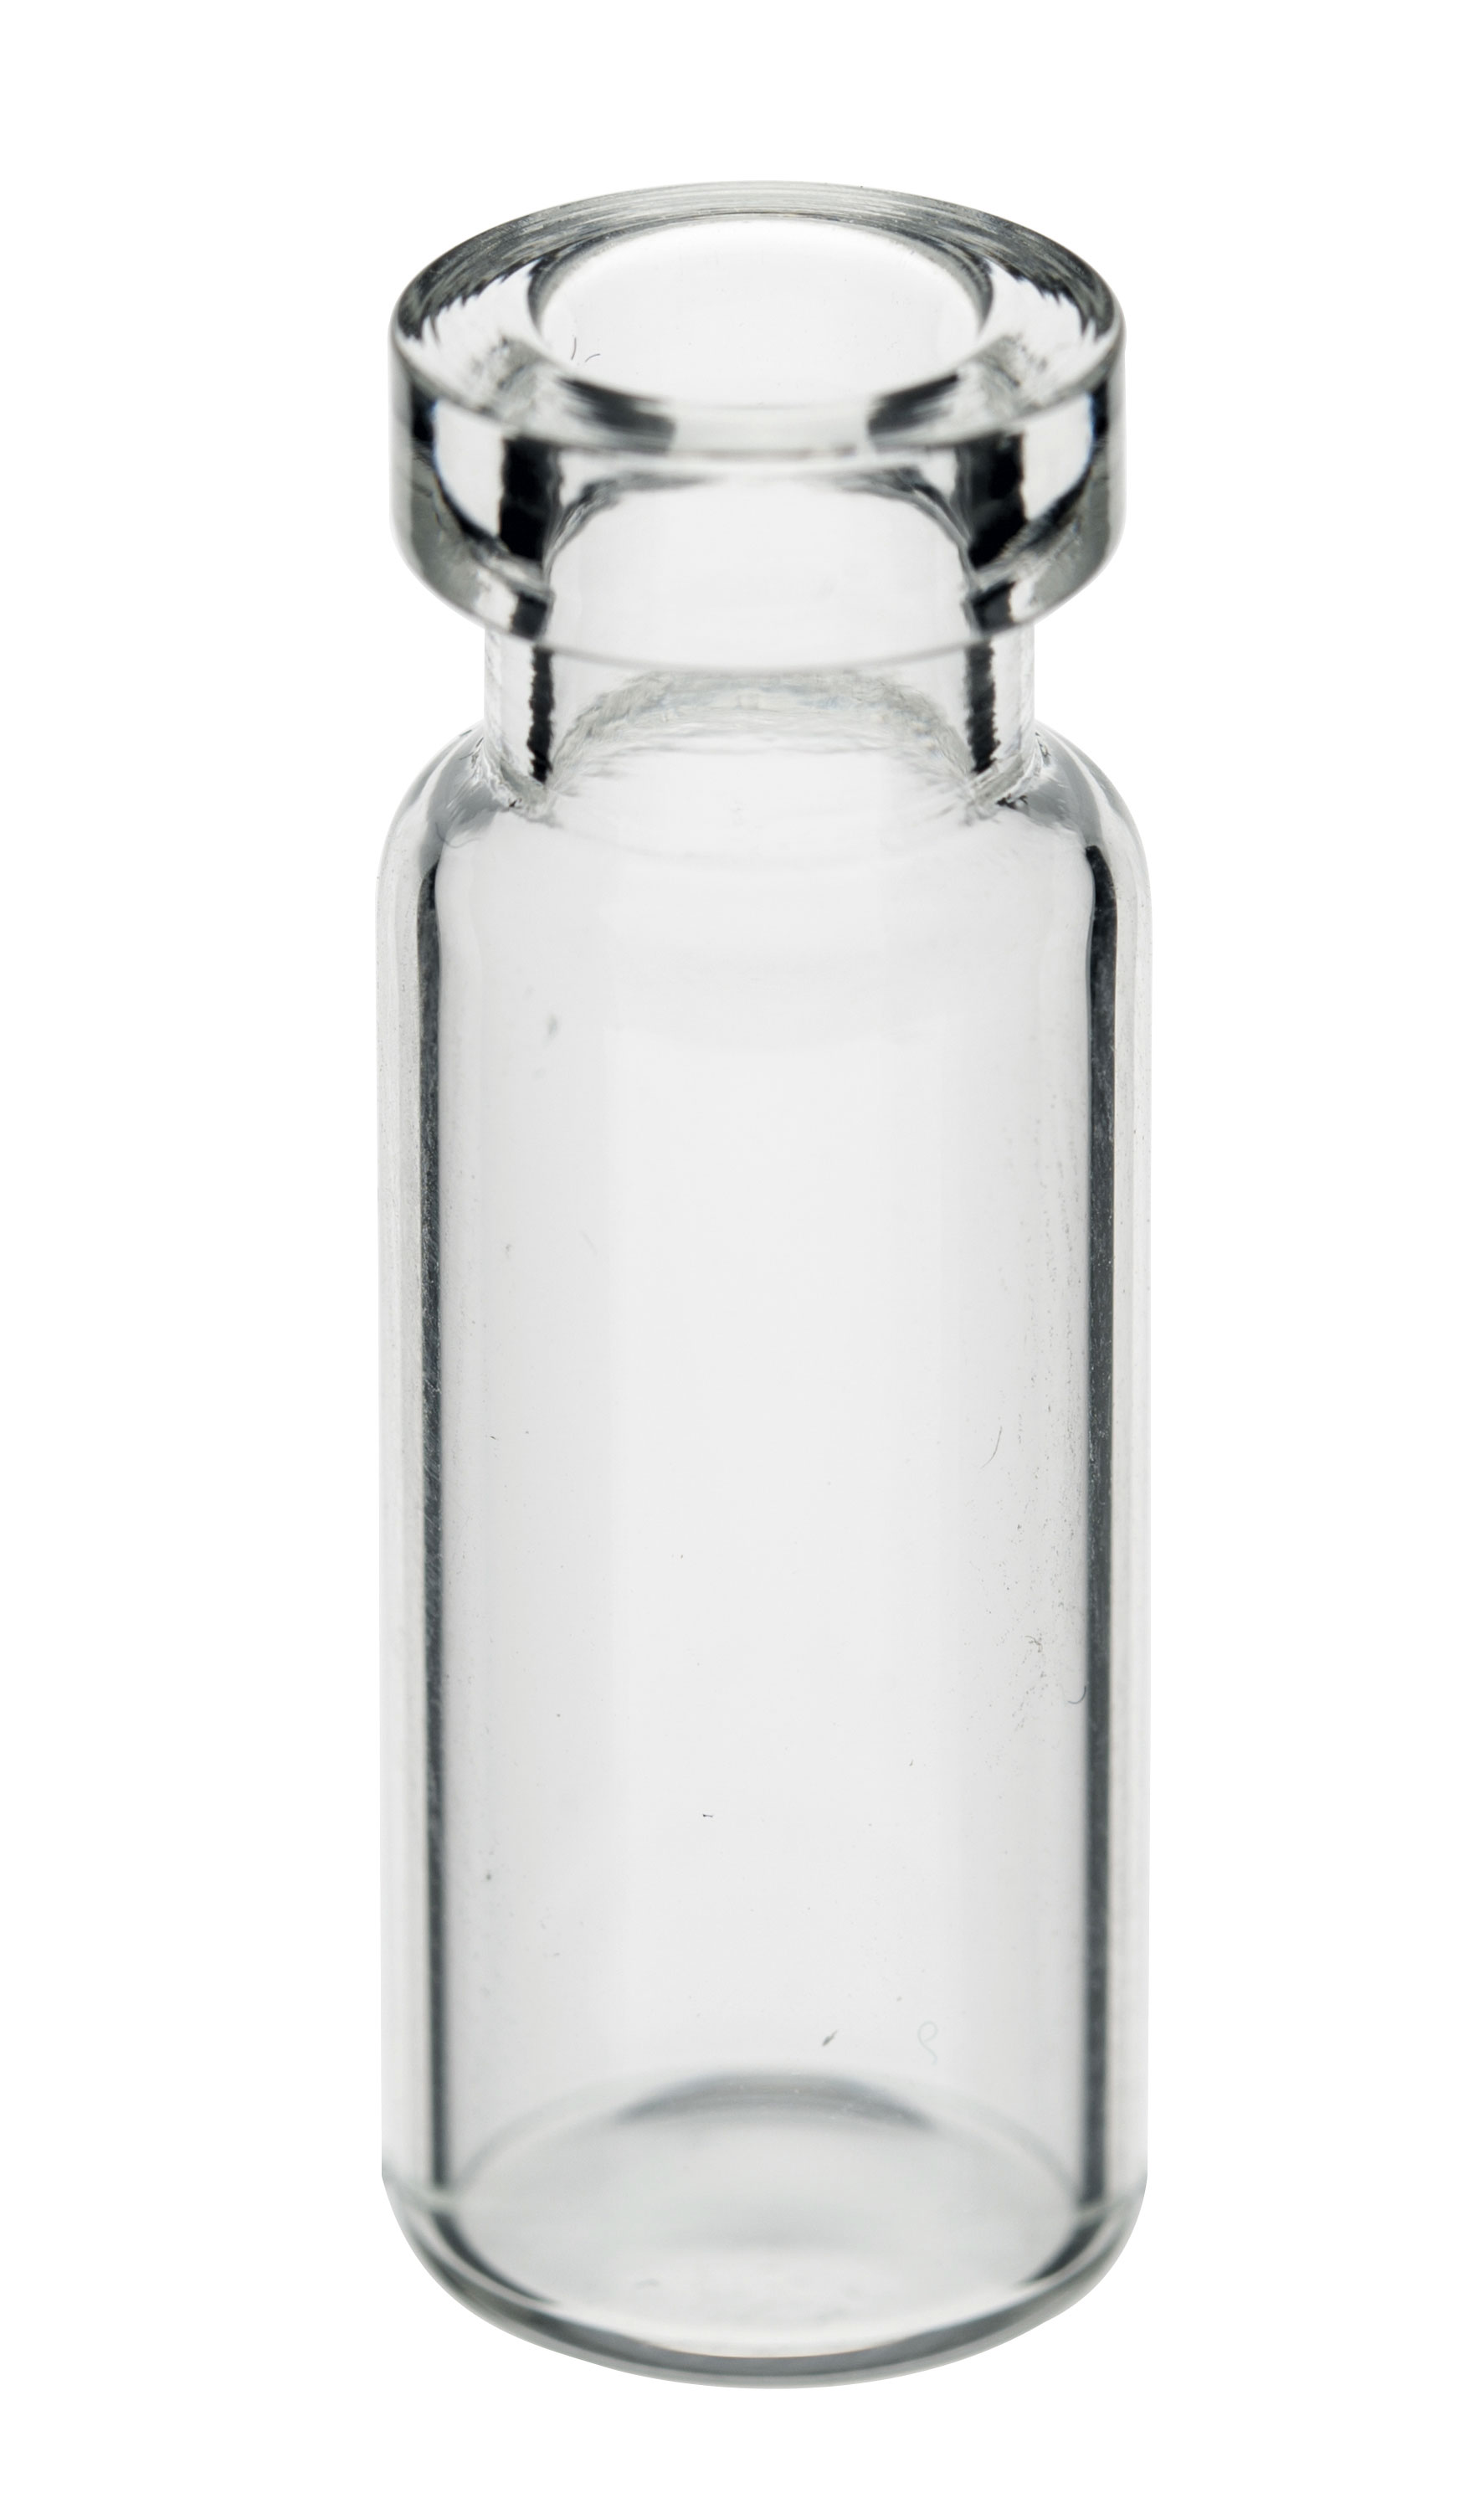 Crimp Top 2ml Vial 12x32mm, Wide Opening. Transparent glass